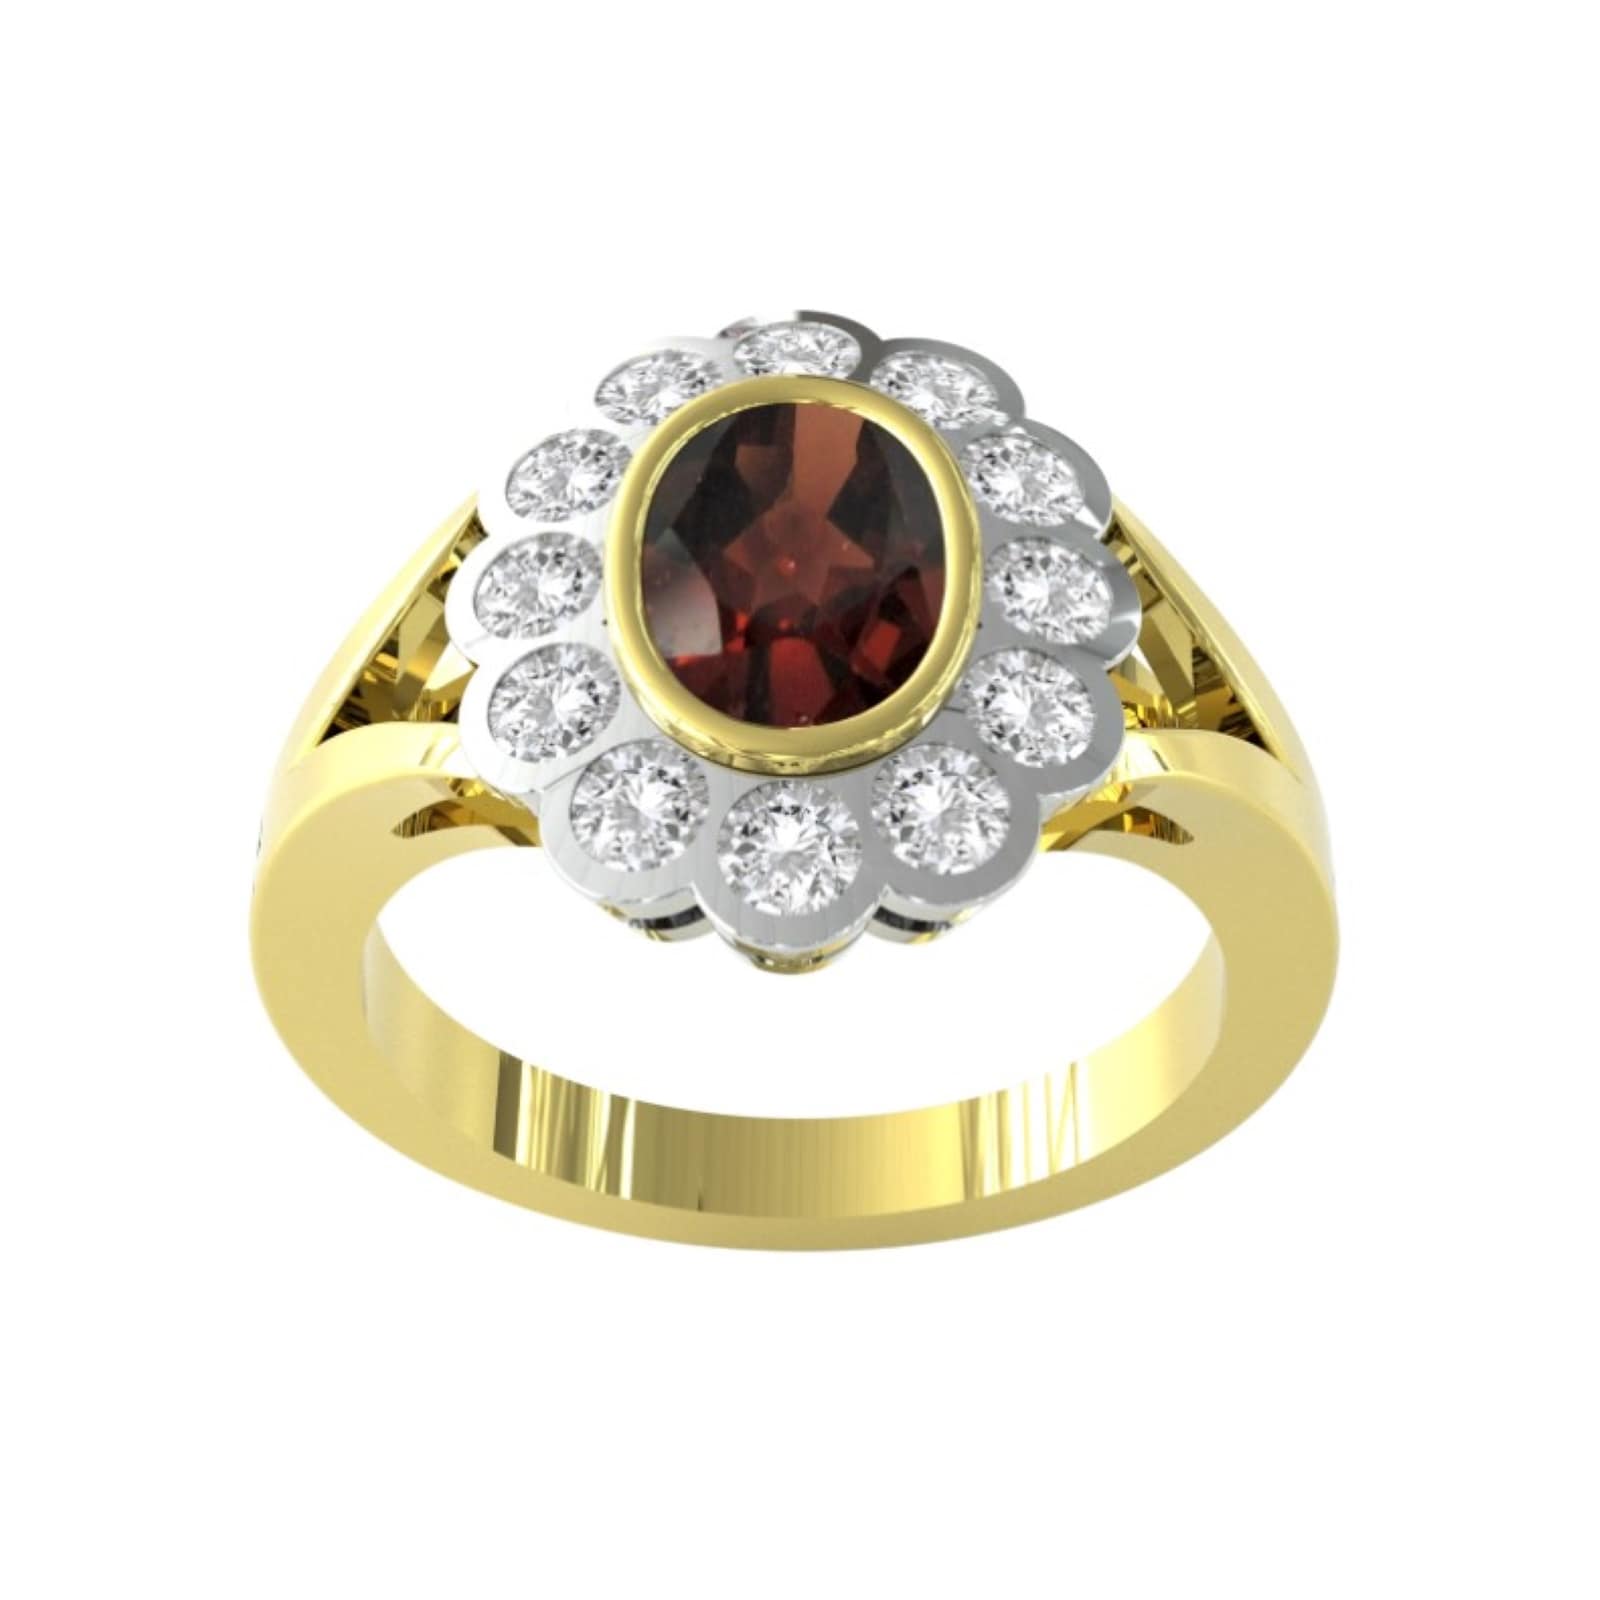 9ct Yellow and White Gold Garnet and Diamond Cluster Ring. - Ring Size E.5